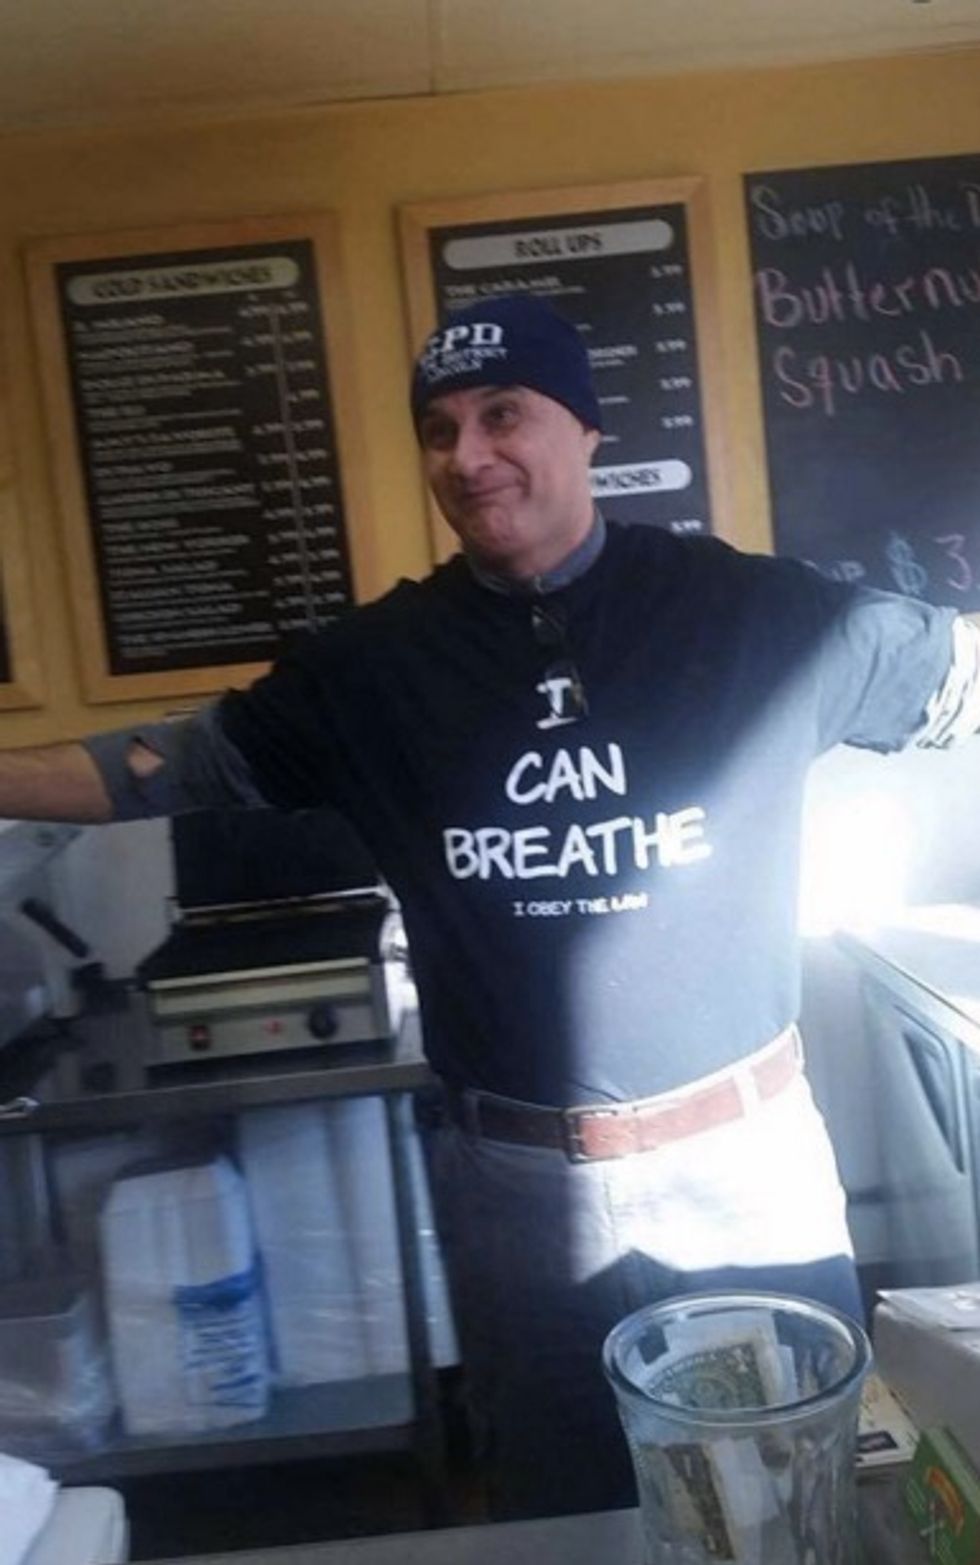 Chicago Deli Owner Dons 'I Can Breathe' T-Shirt, Then Apologizes After Torrent of Nasty Online Messages